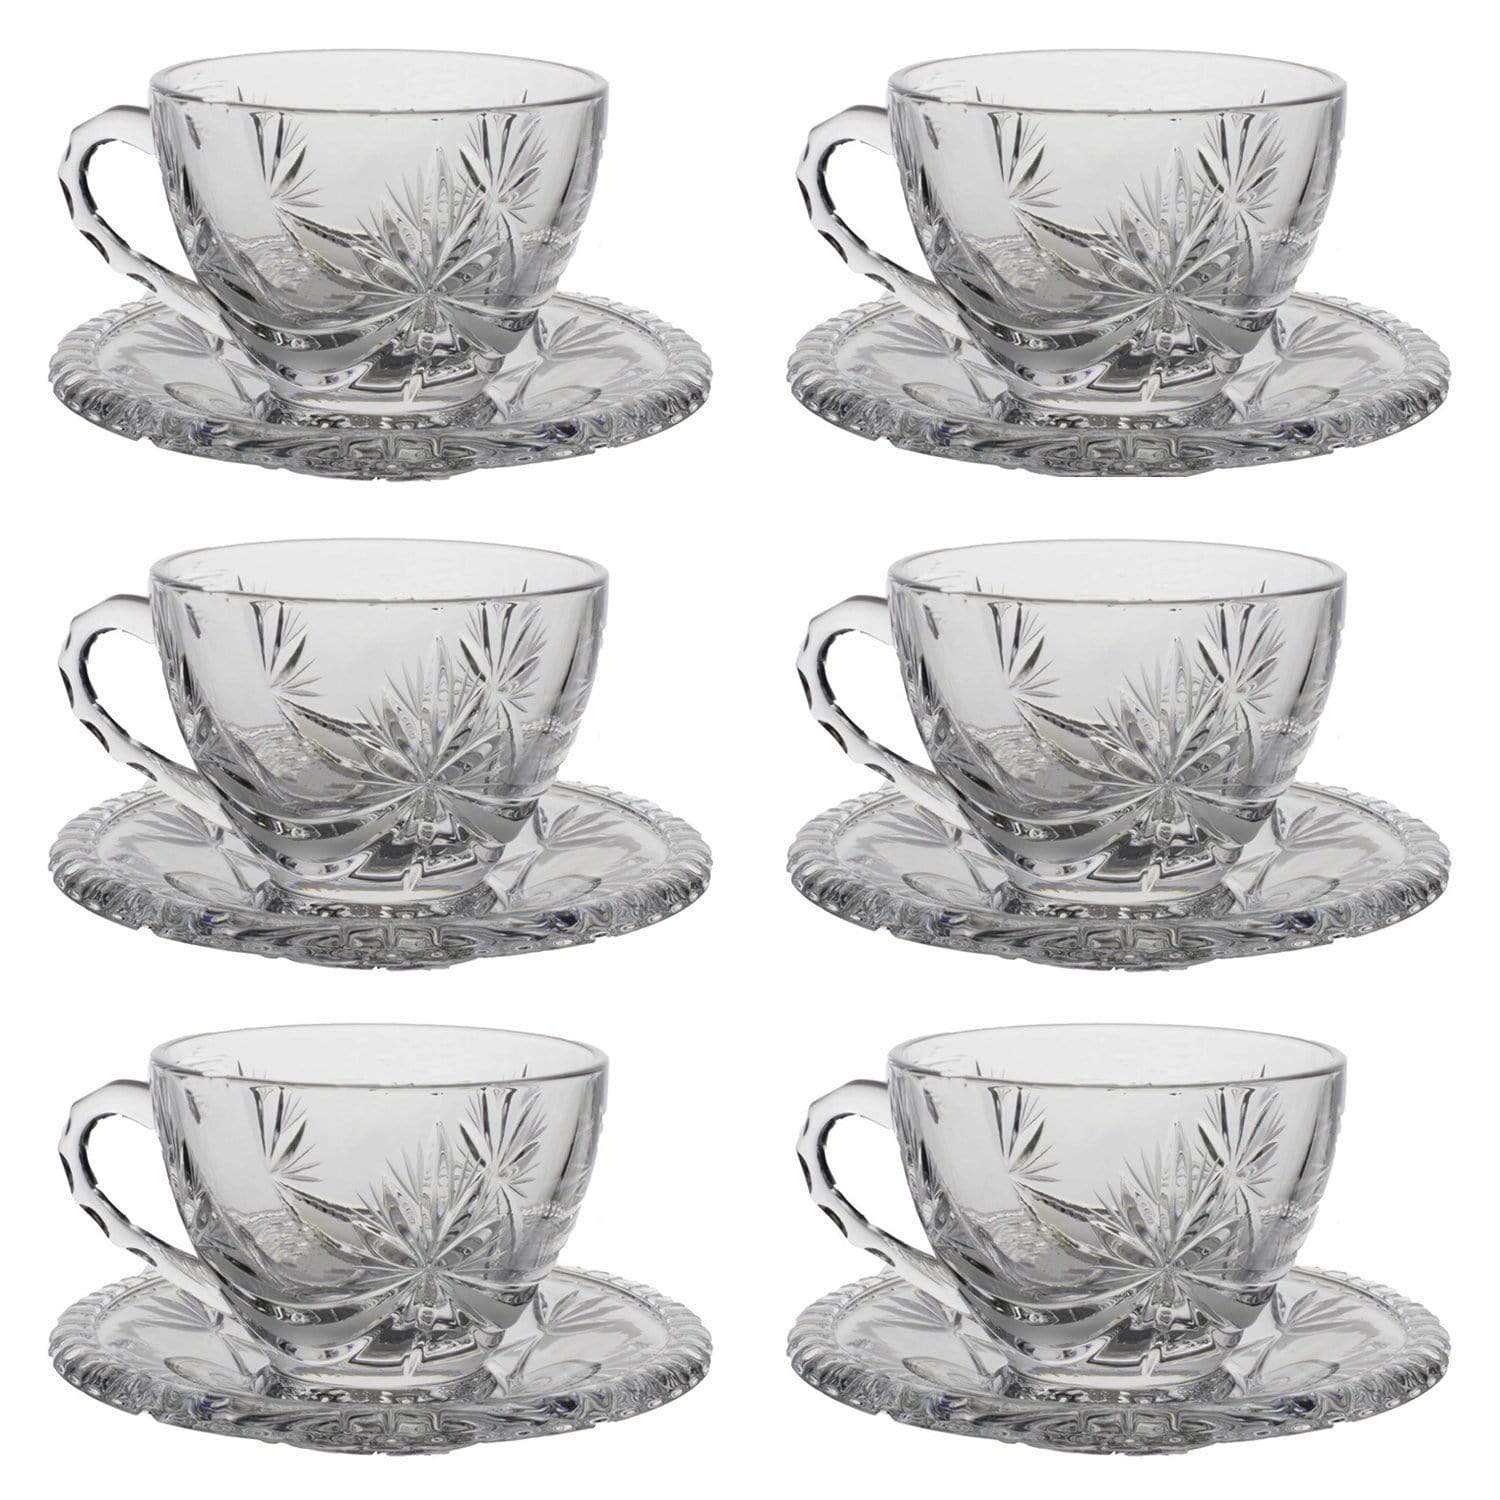 Bohemia Crystal Glass Sherine Cup and Saucer Set - Clear, 17002_621 - 5392128 - Jashanmal Home